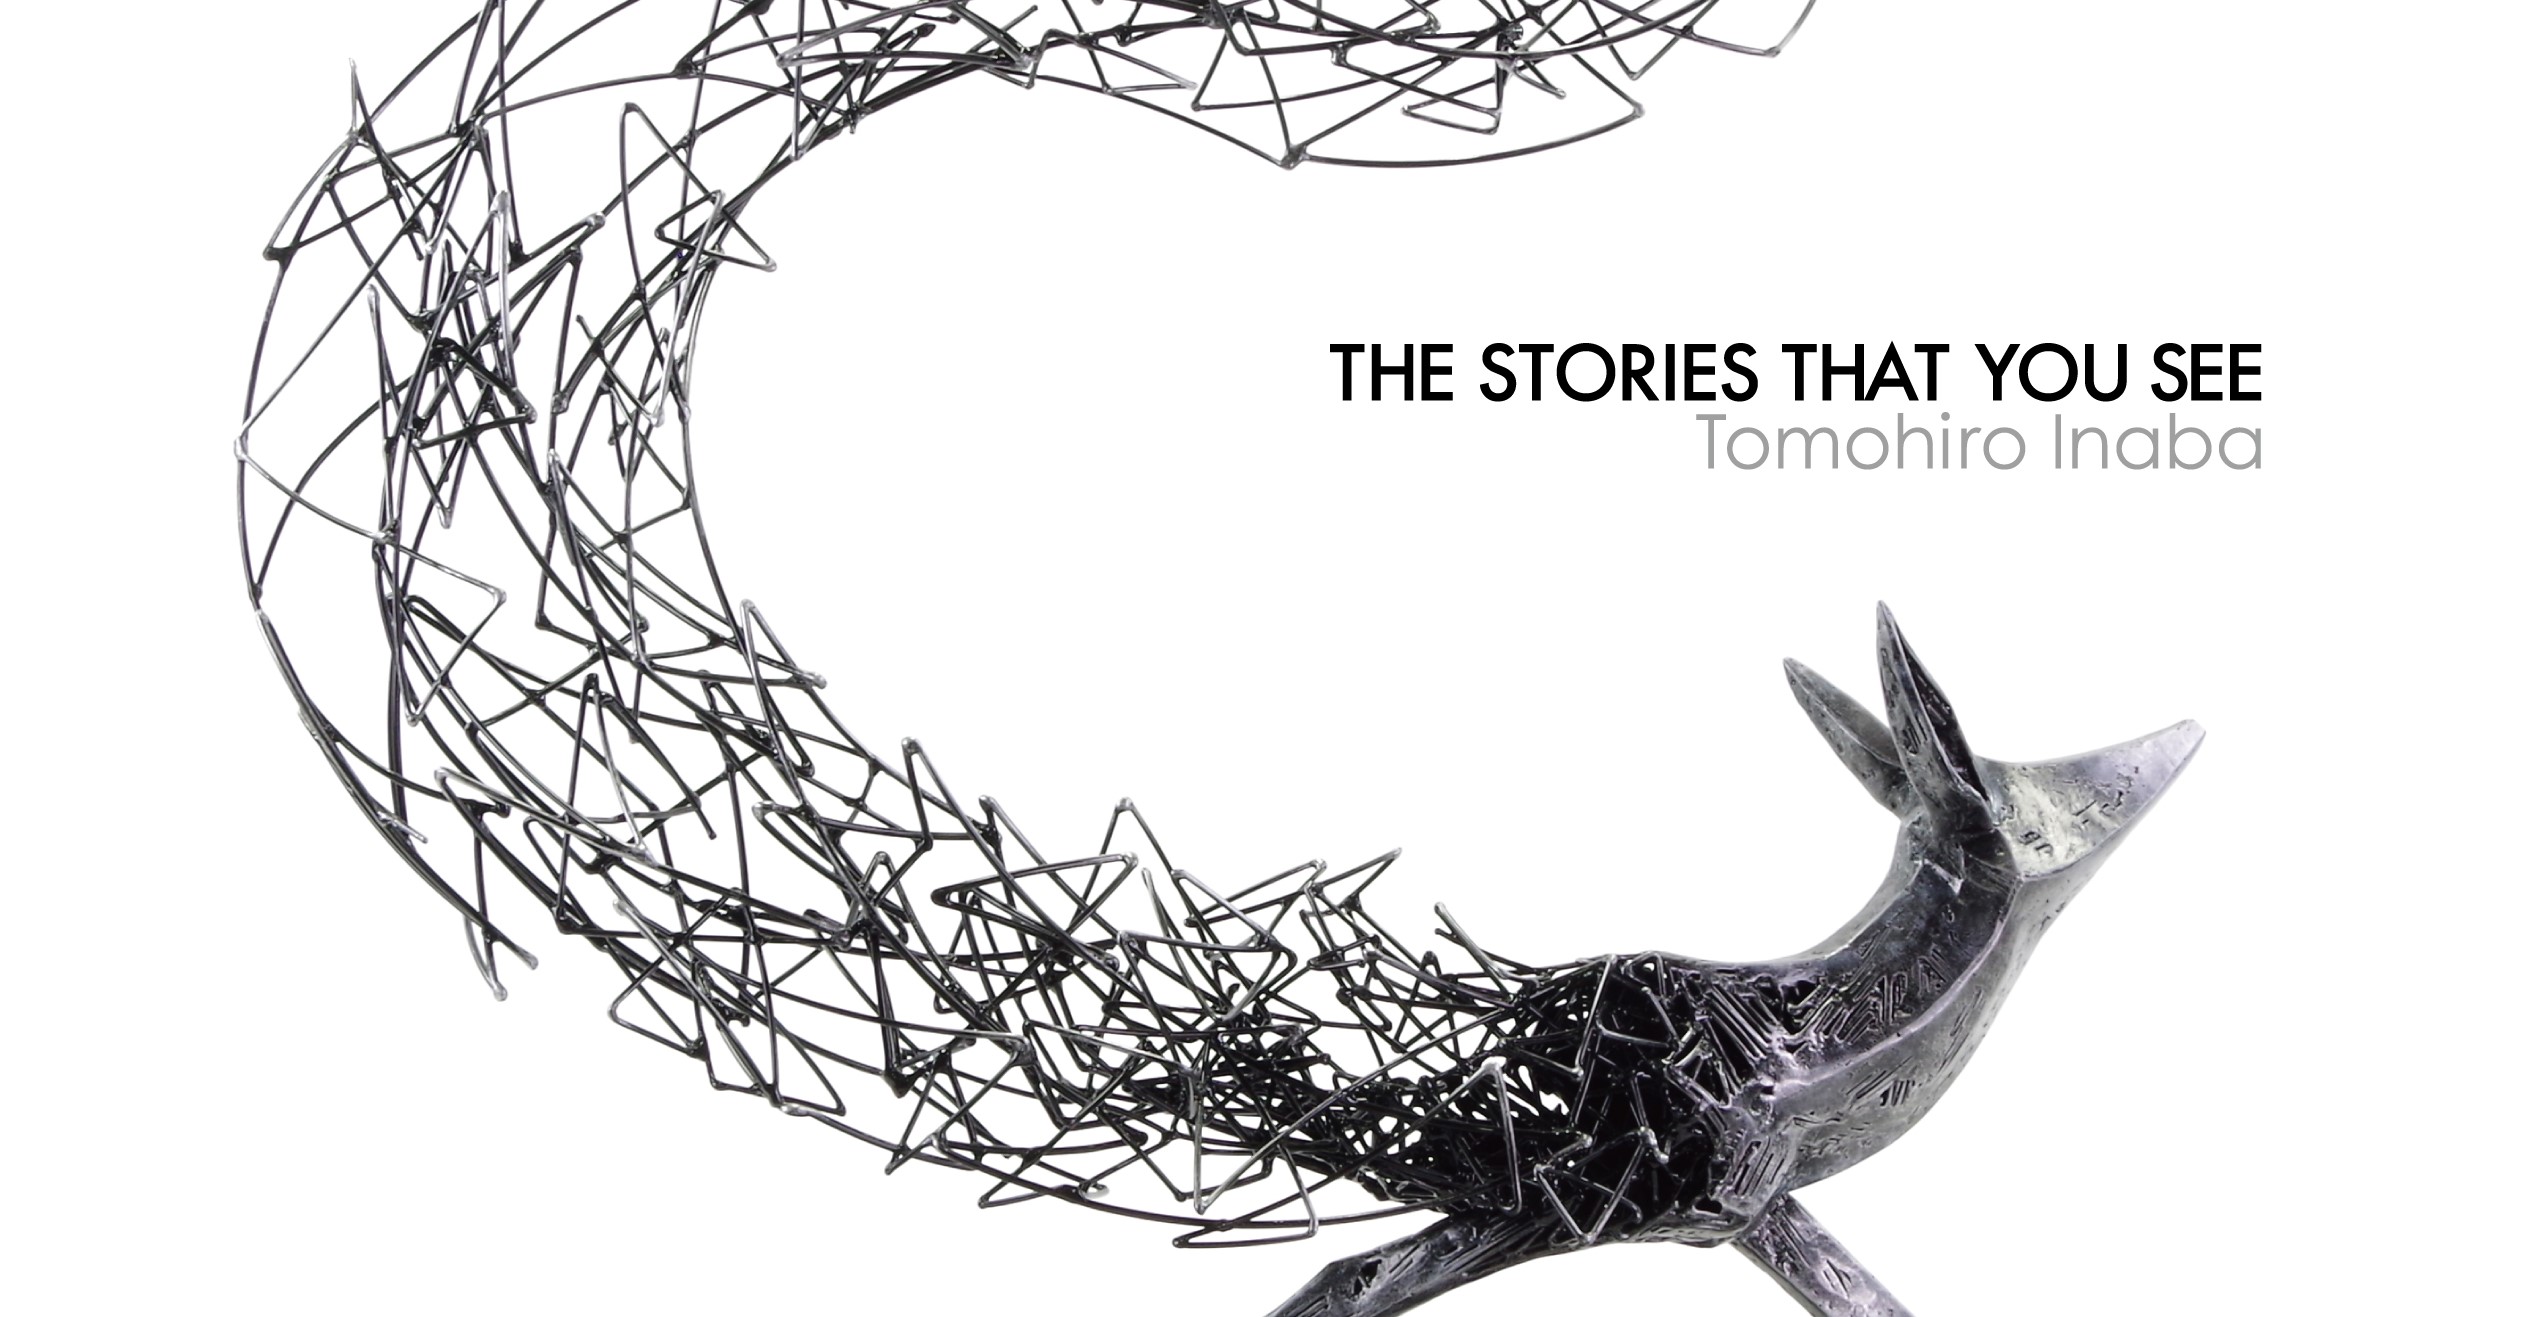 Tomohiro Inaba　THE STORIES THAT YOU SEE